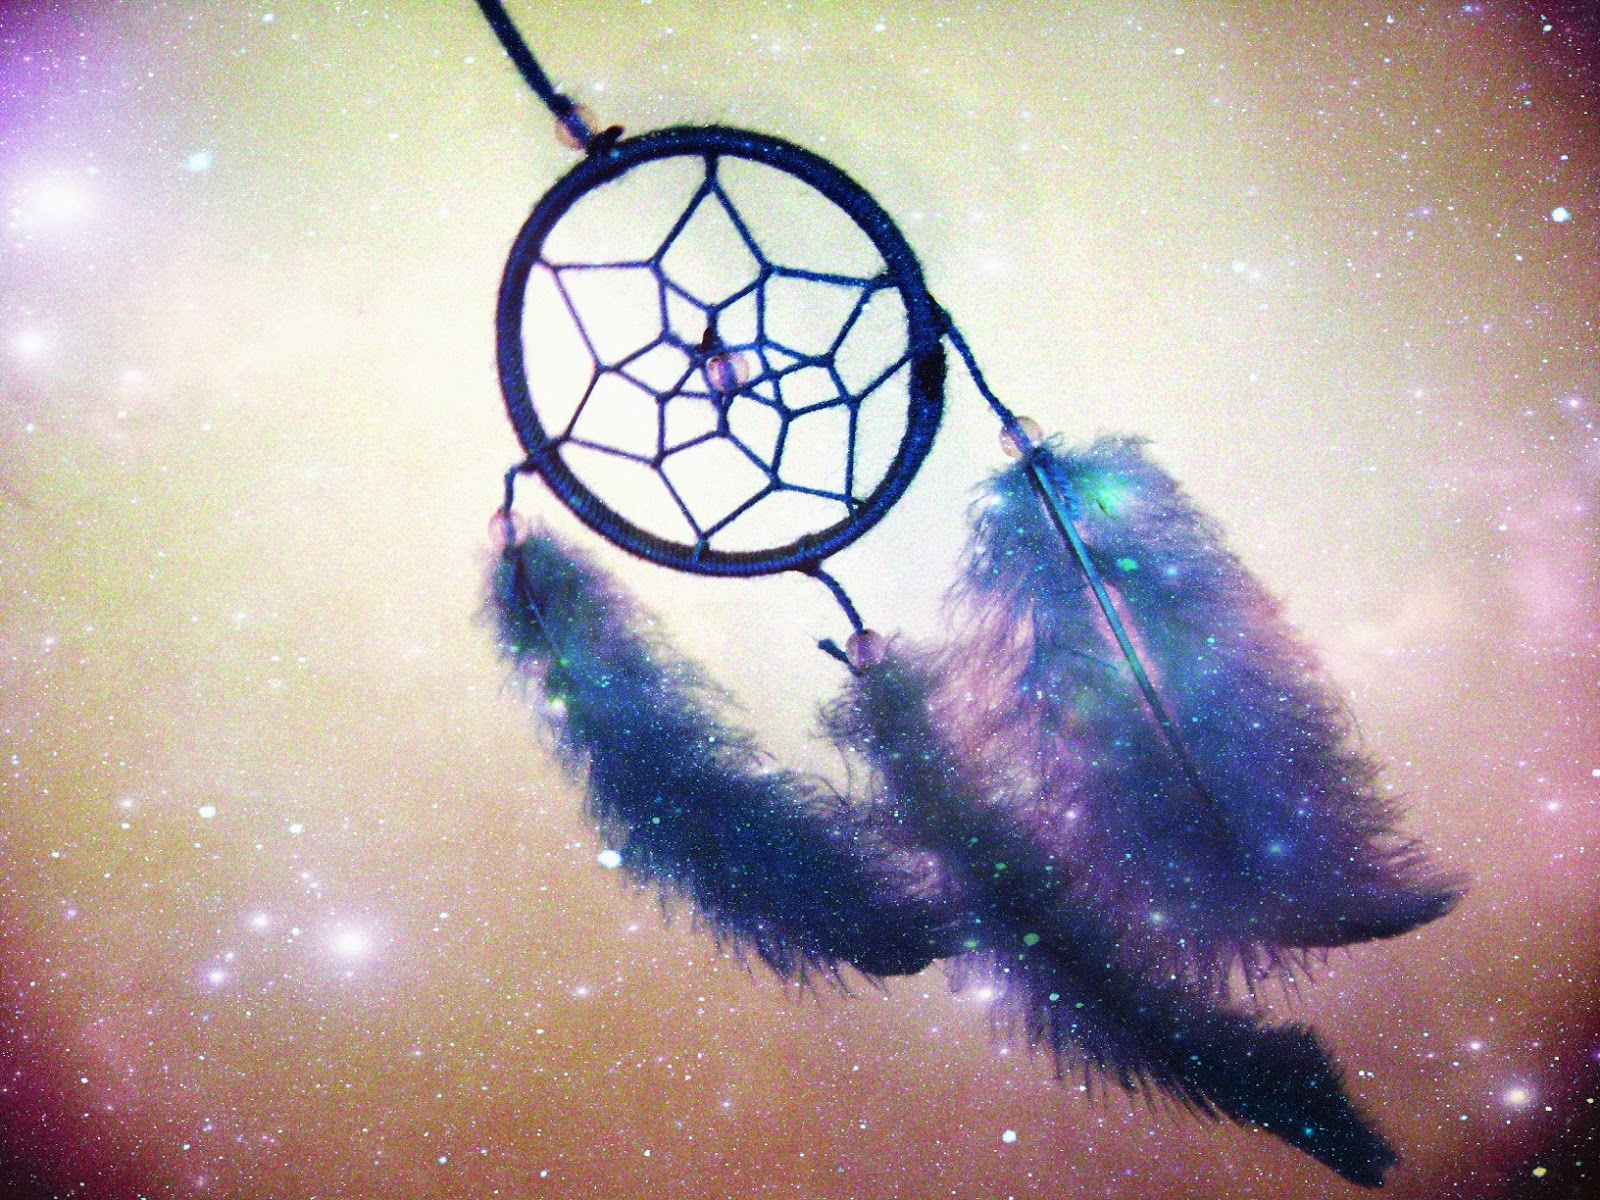 beautiful dreamcatcher wallpapers HD You can take it as background